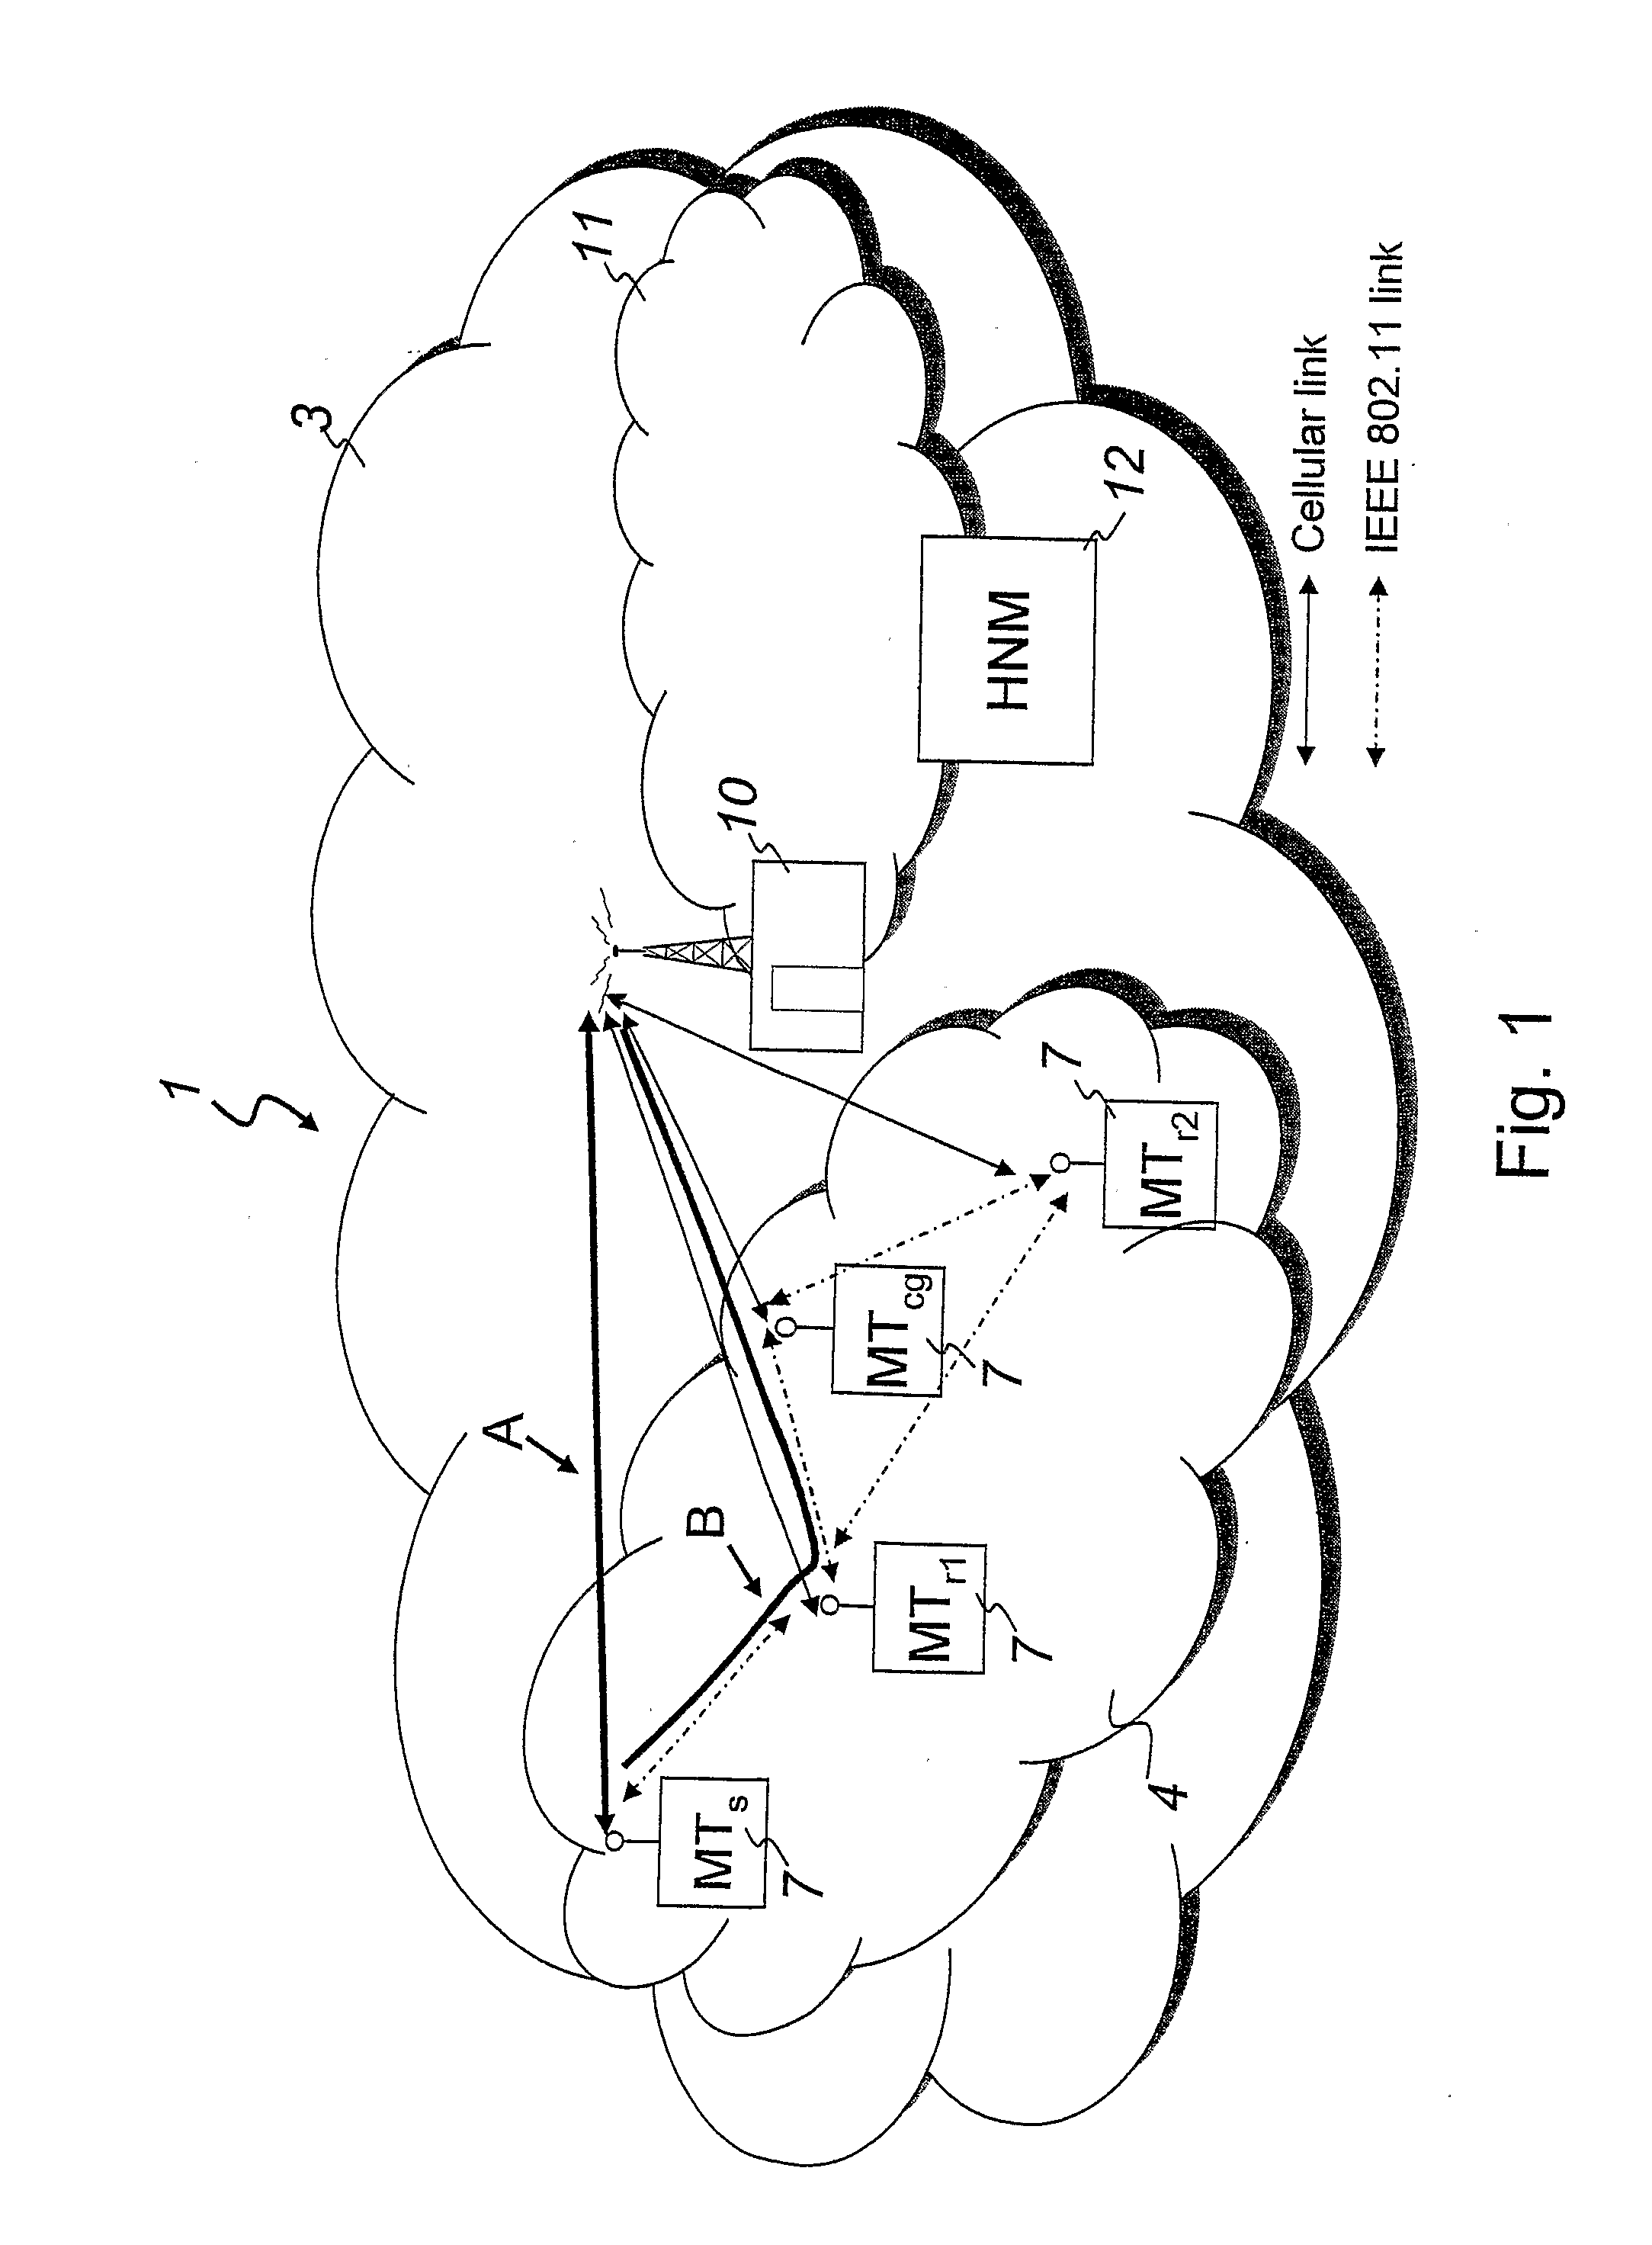 Management of a Hybrid Communication Network Comprising a Cellular Network and a Local Network